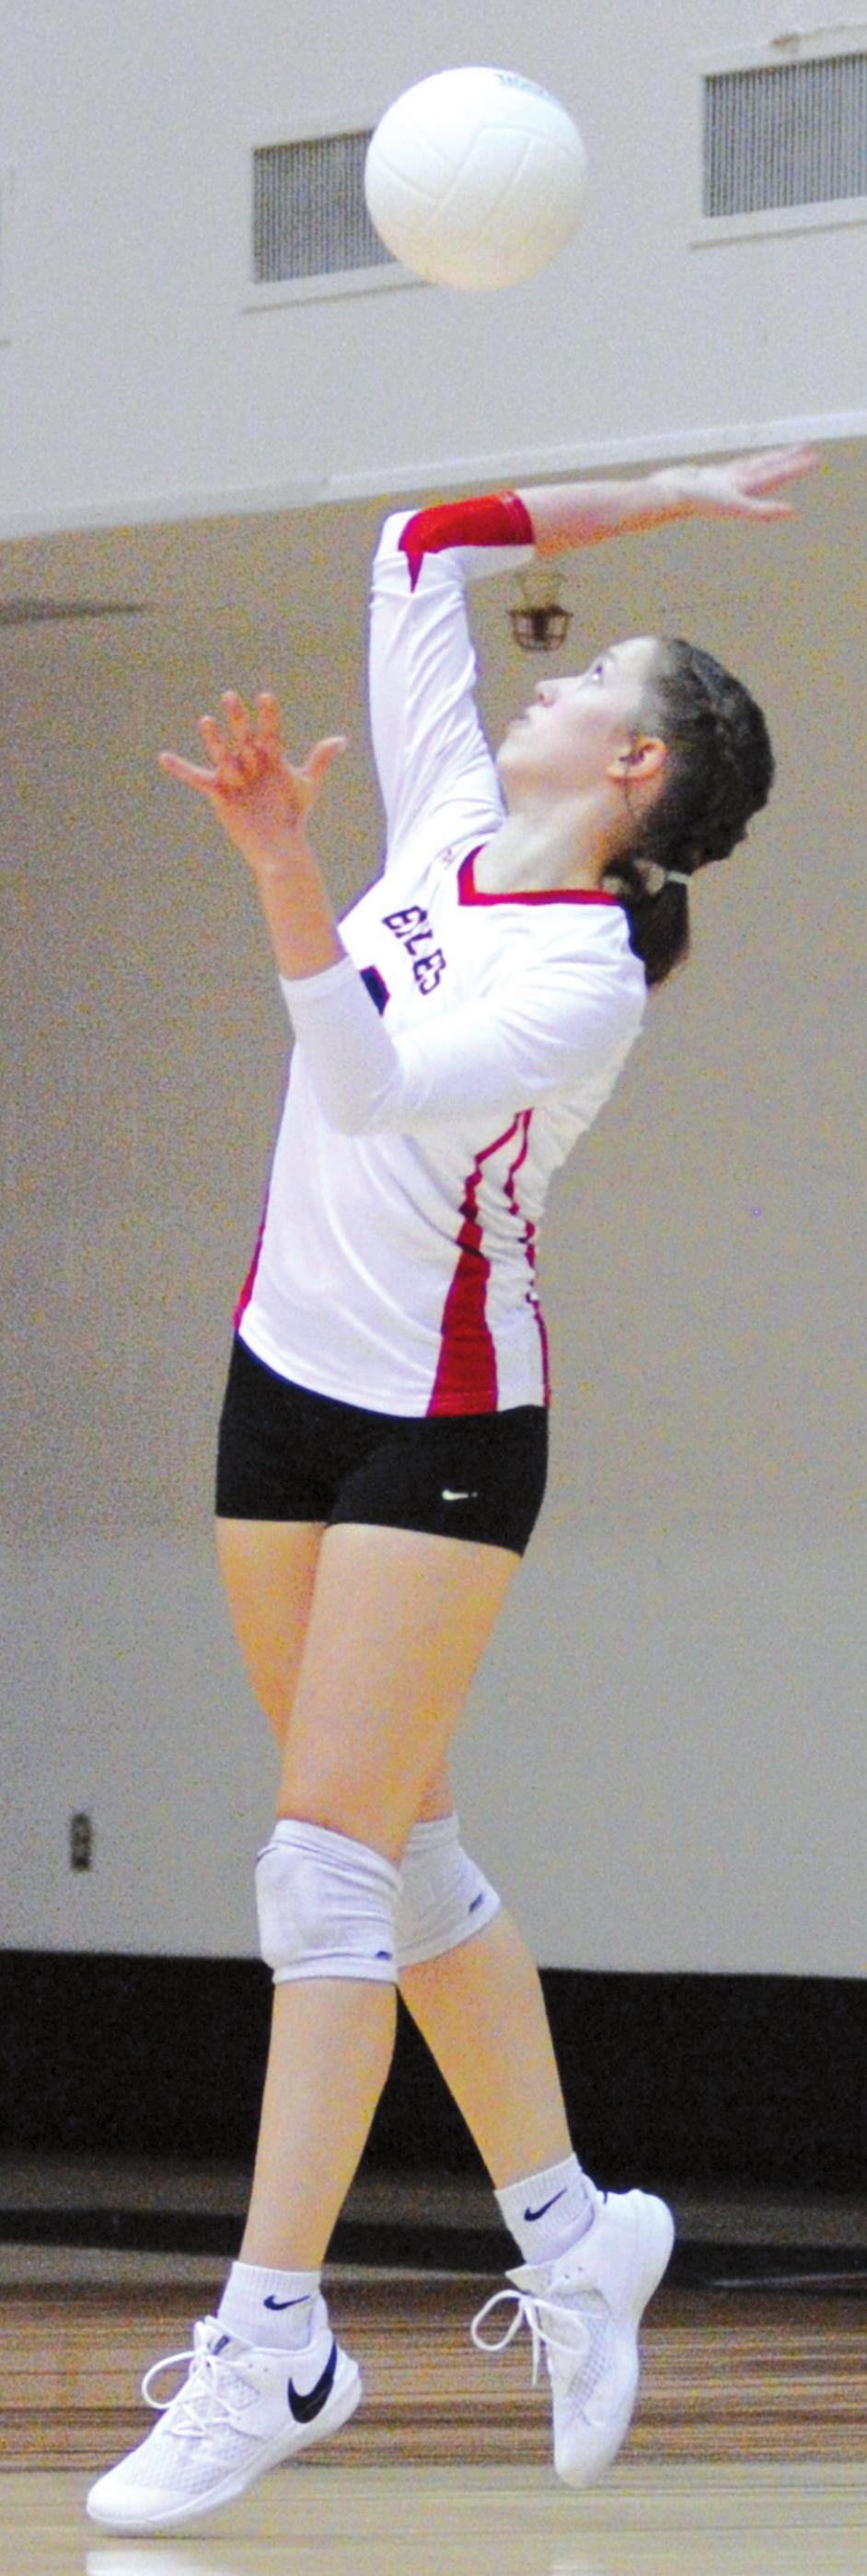 Josh Burton/WDN Lakin Green serves during Weatherford’s game at home against Newcastle this past week.